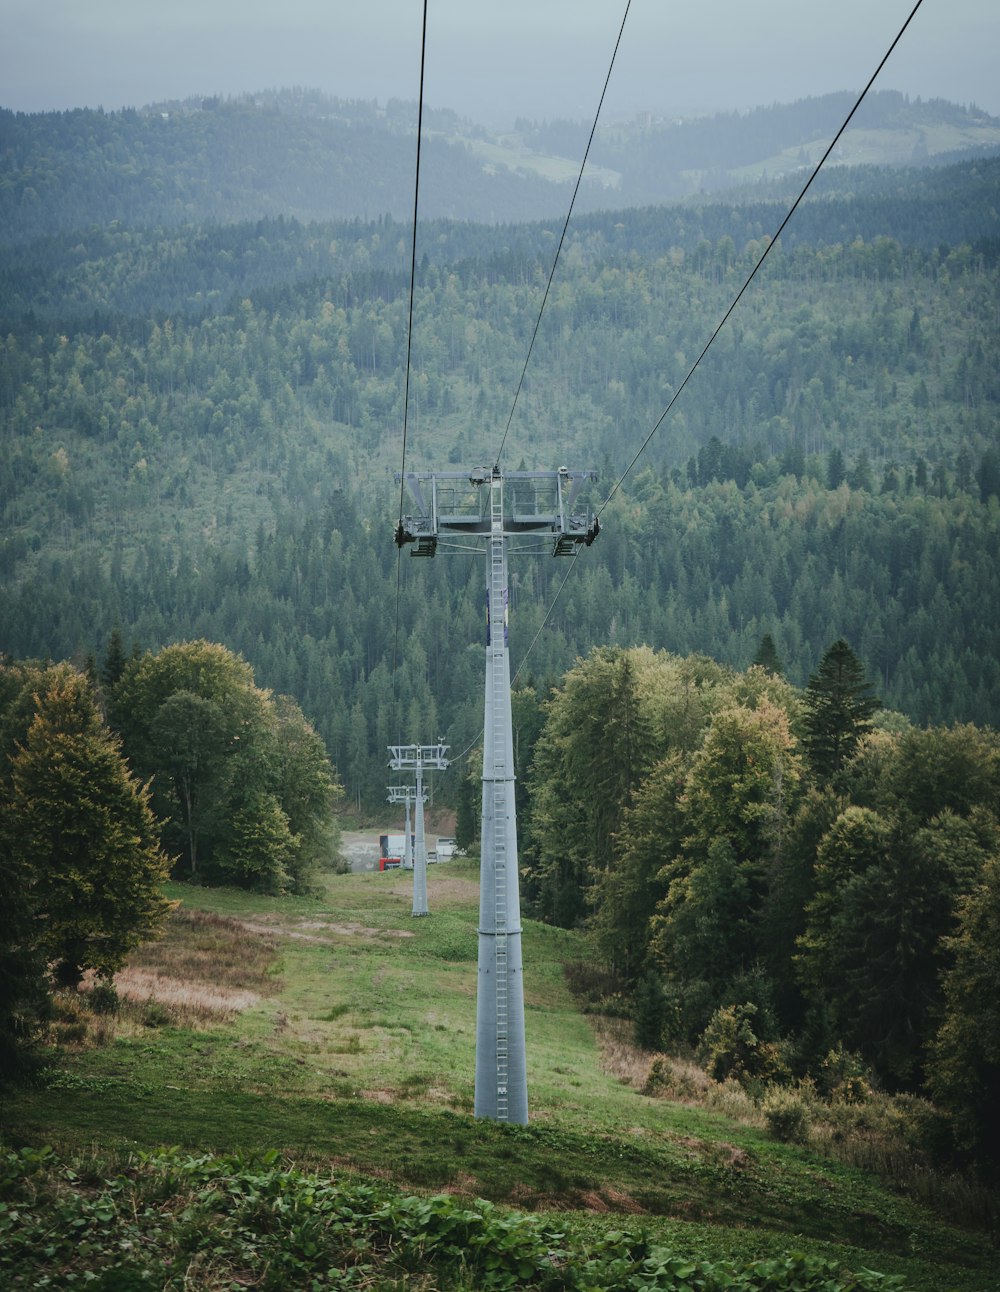 a ski lift going up a hill with trees in the background